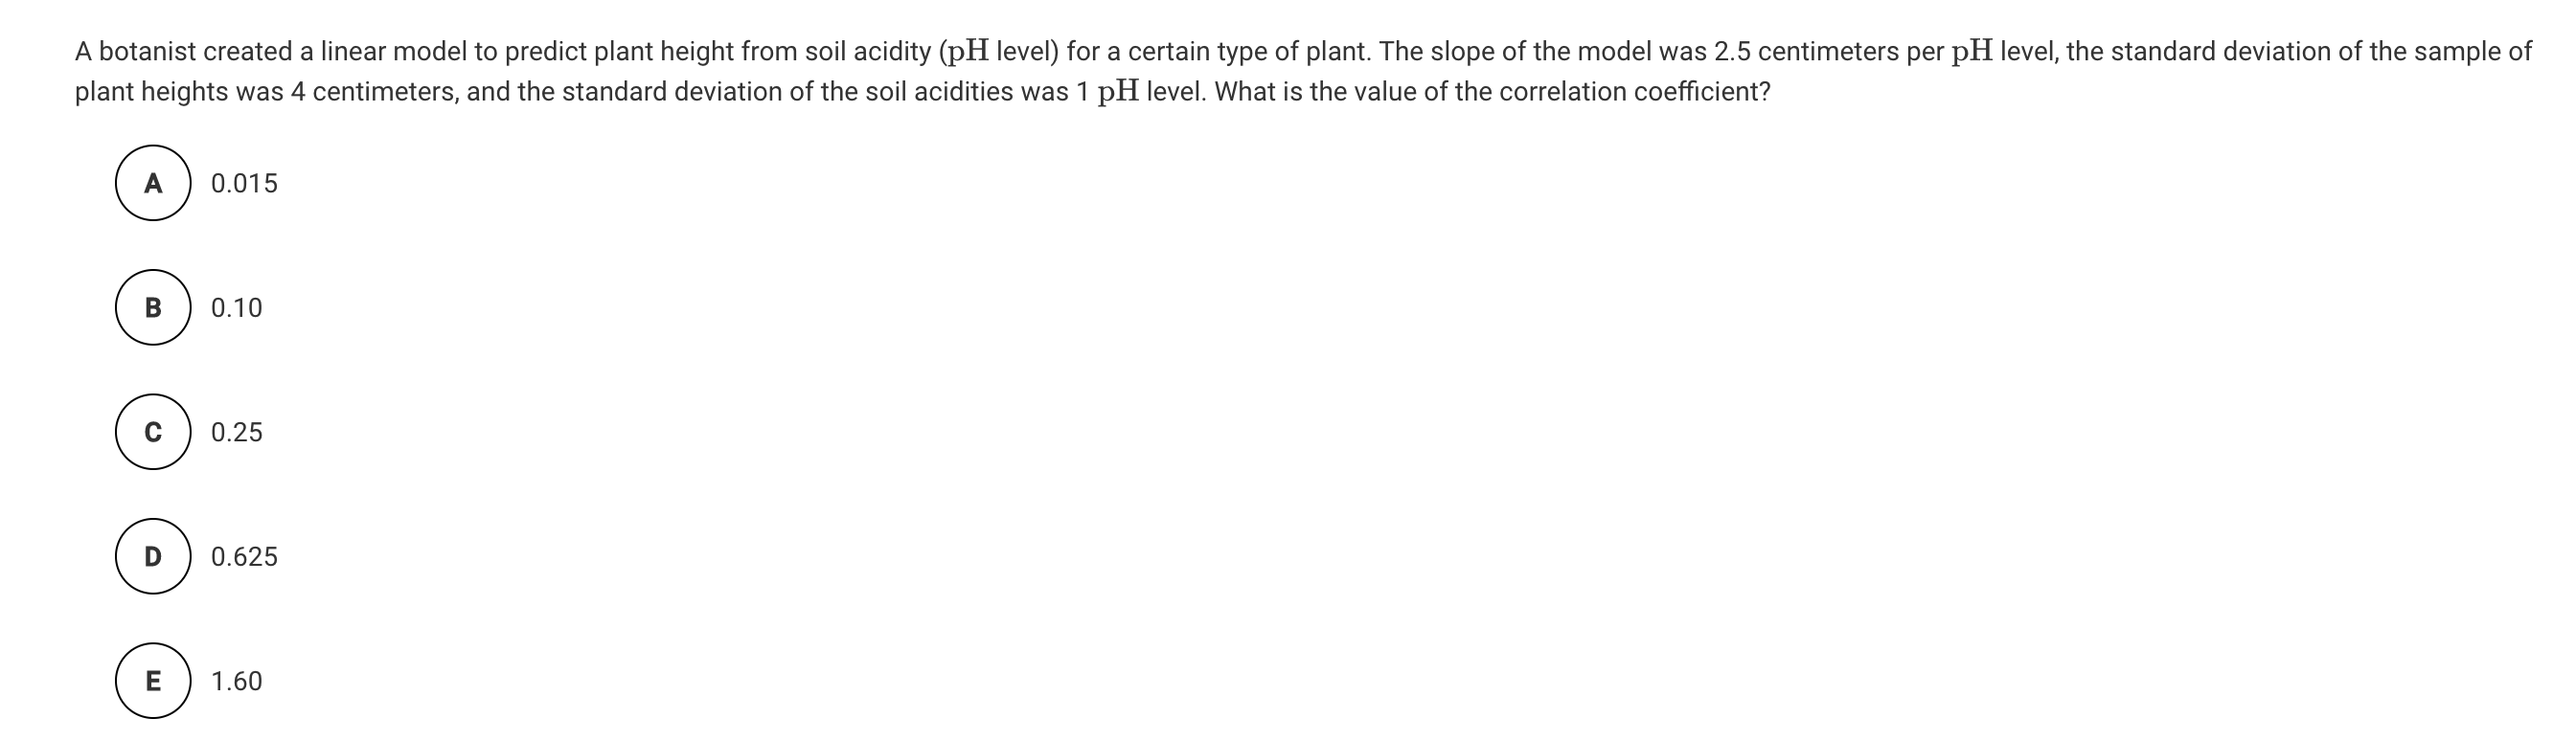 A botanist created a linear model to predict plant height from soil acidity (pH level) for a certain type of plant. The slope of the model was 2.5 centimeters per pH level, the standard deviation of the sample of
plant heights was 4 centimeters, and the standard deviation of the soil acidities was 1 pH level. What is the value of the correlation coefficient?
A
0.015
В
0.10
0.25
0.625
E
1.60
